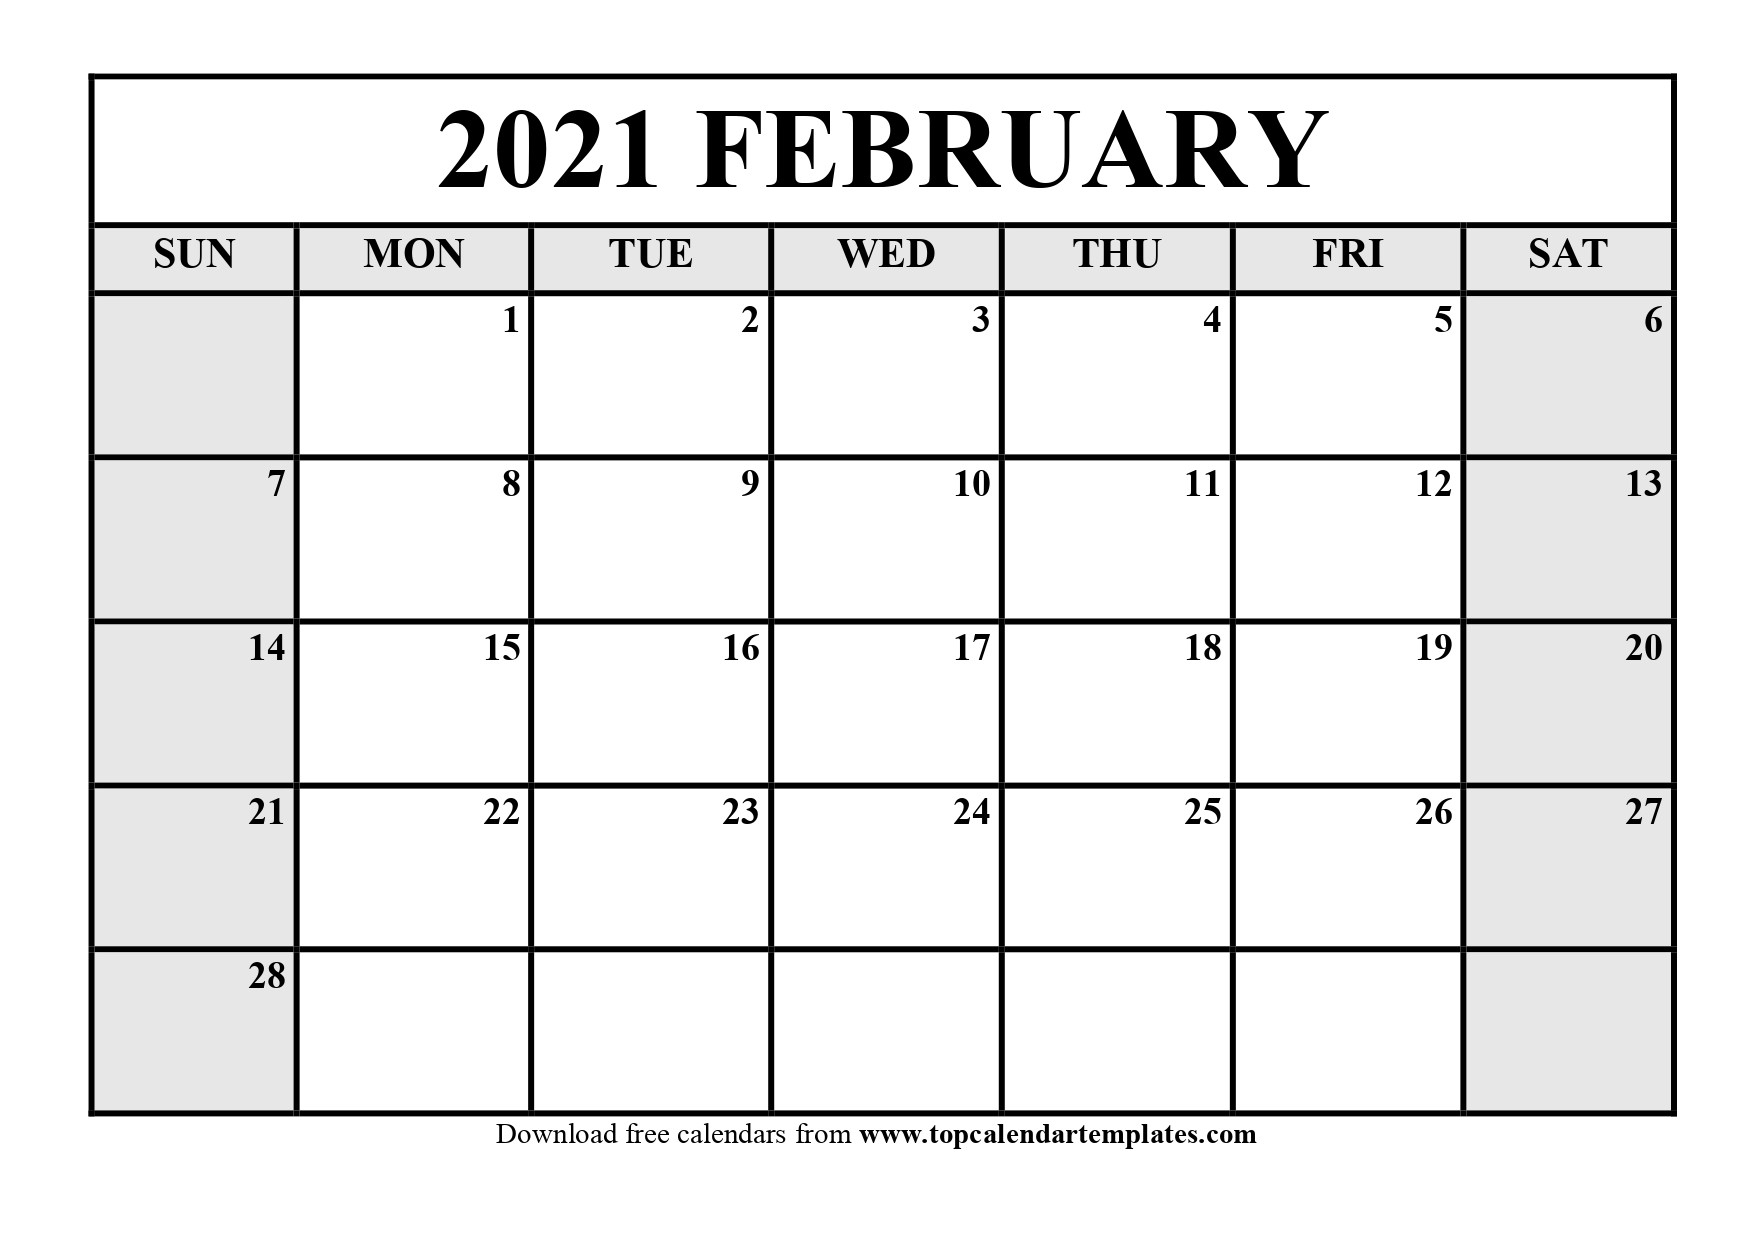 2021 Print Free Calendars Without Downloading | Calendar-Free Printable Monthly Calender 2021